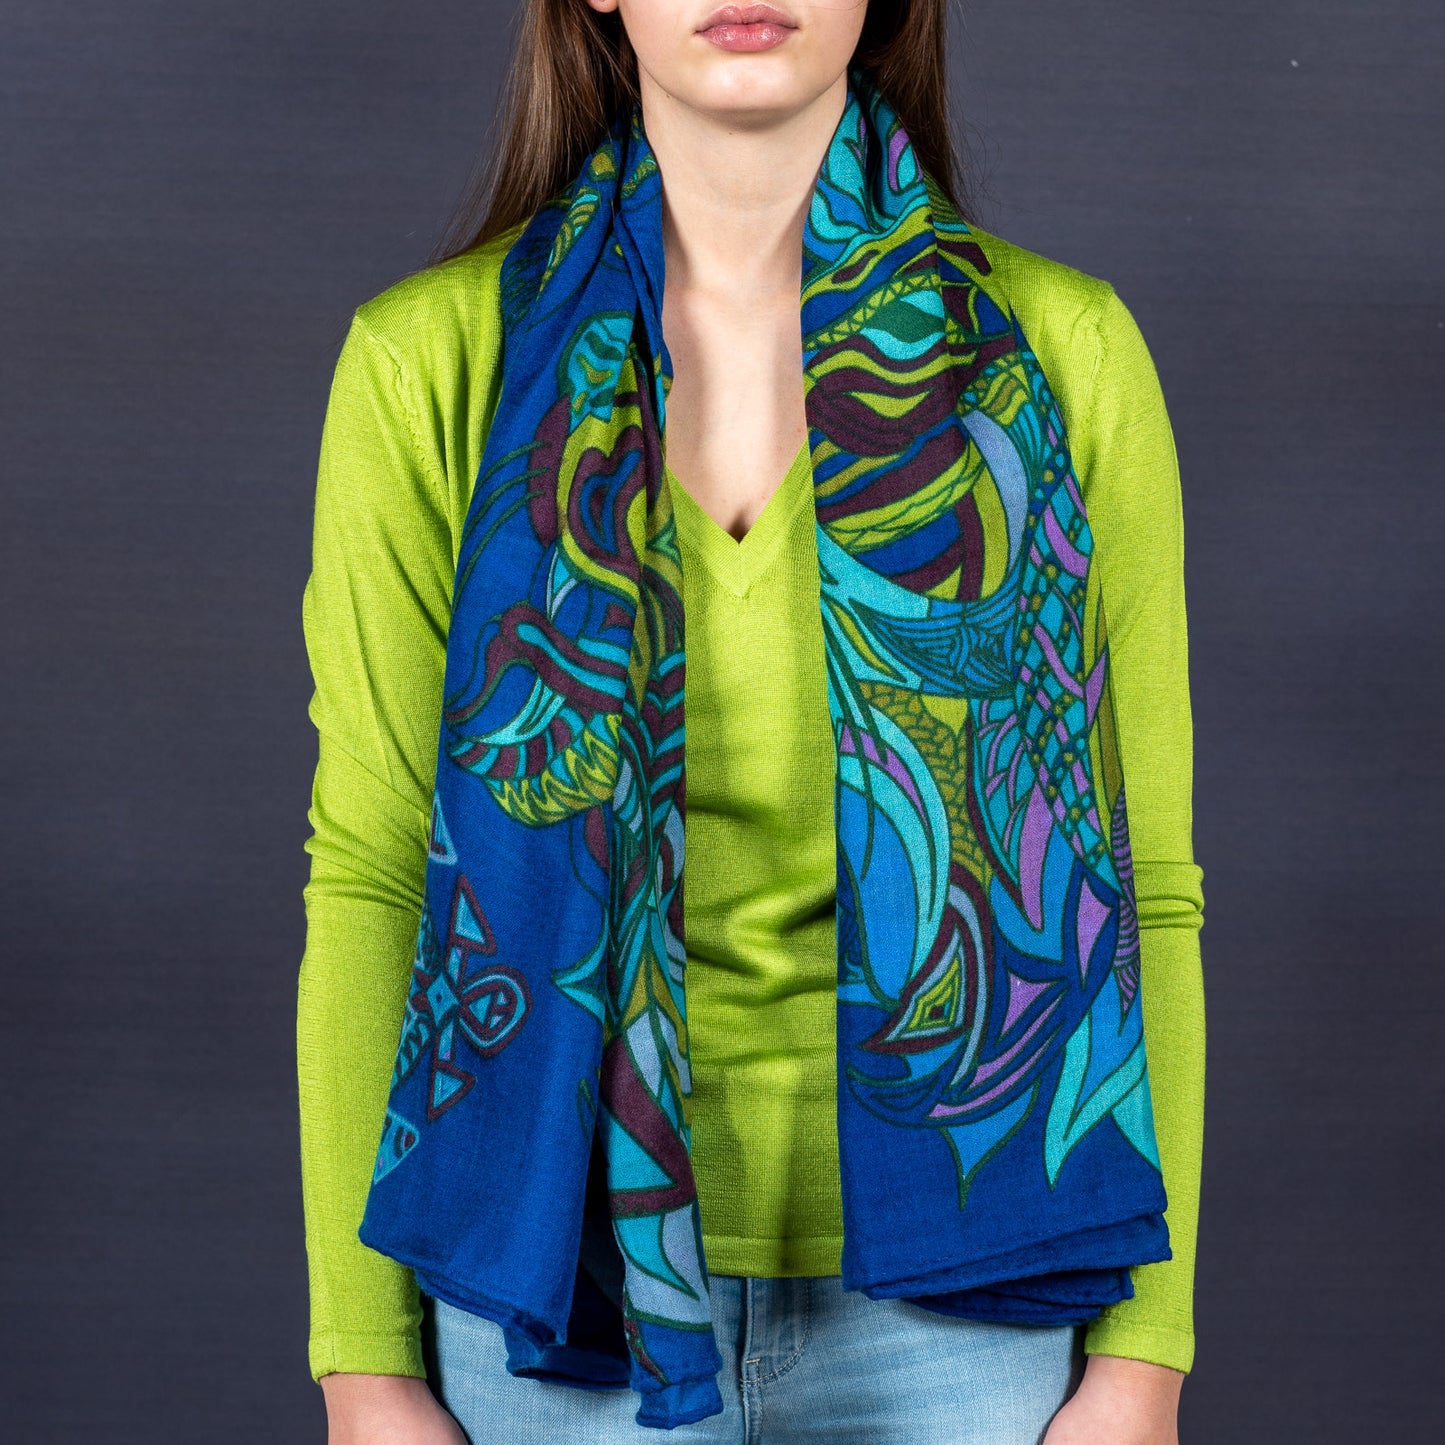 "WILD LIFE" blue/green LIMITED EDITION 4/5 cashmere scarf